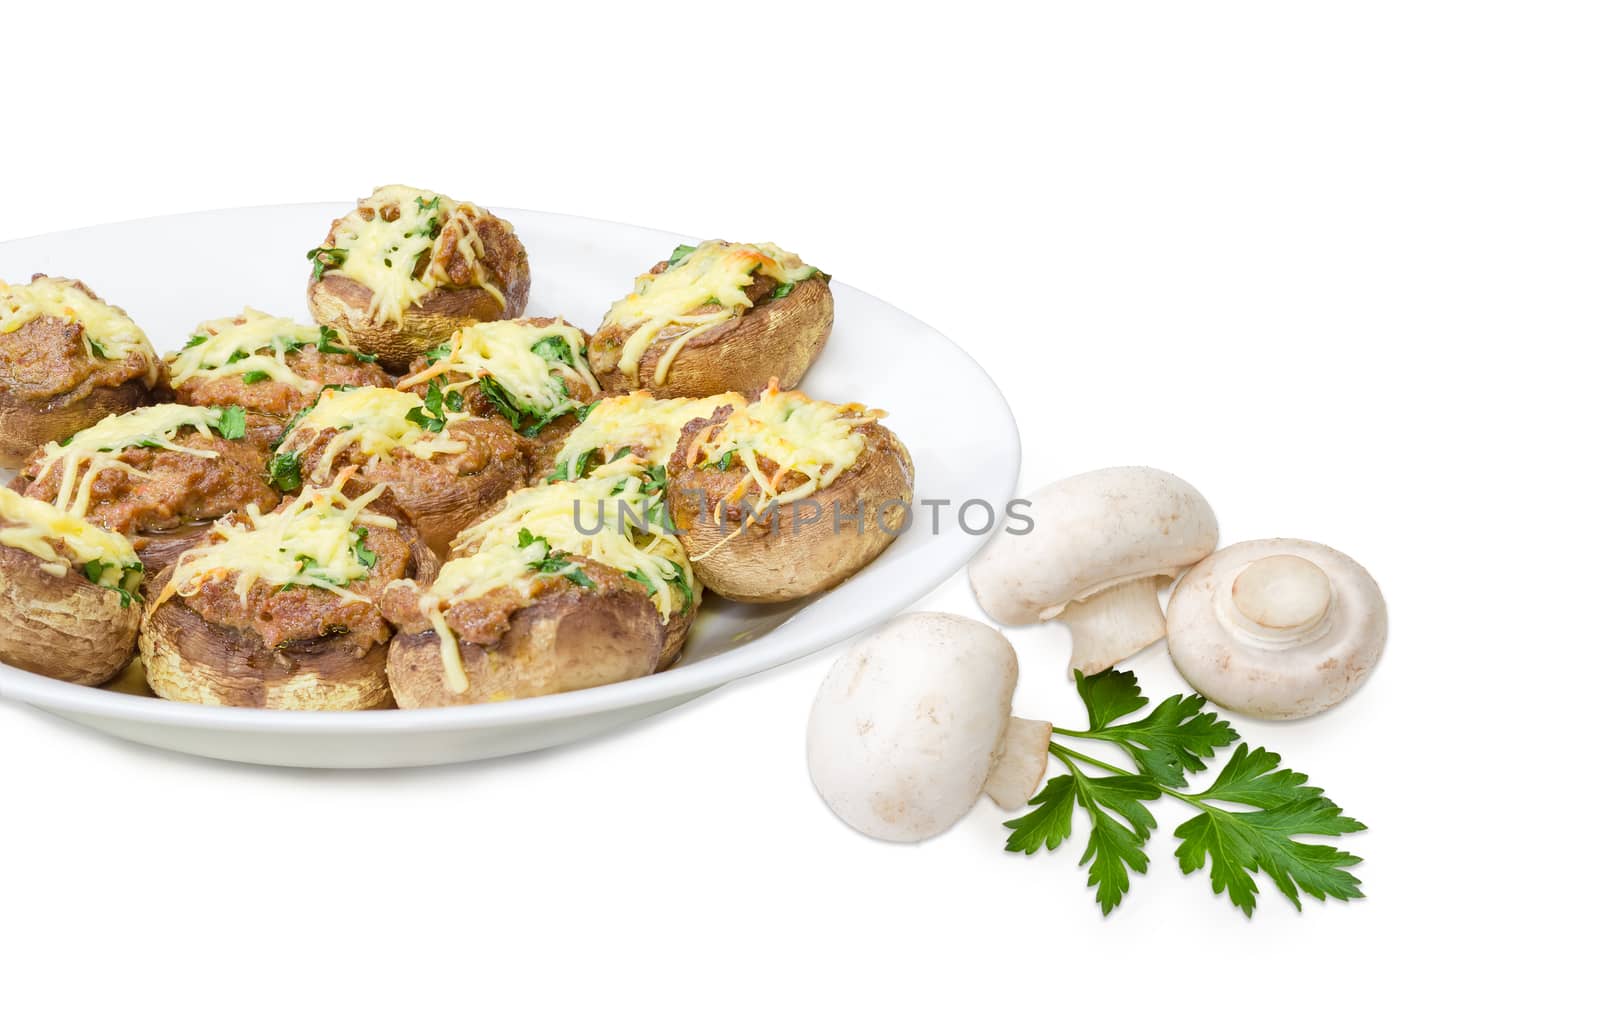 Baked button mushrooms stuffed with minced meat, cheese and greens on the white dish and several uncooked mushrooms with parsley twig beside closeup on a light background
